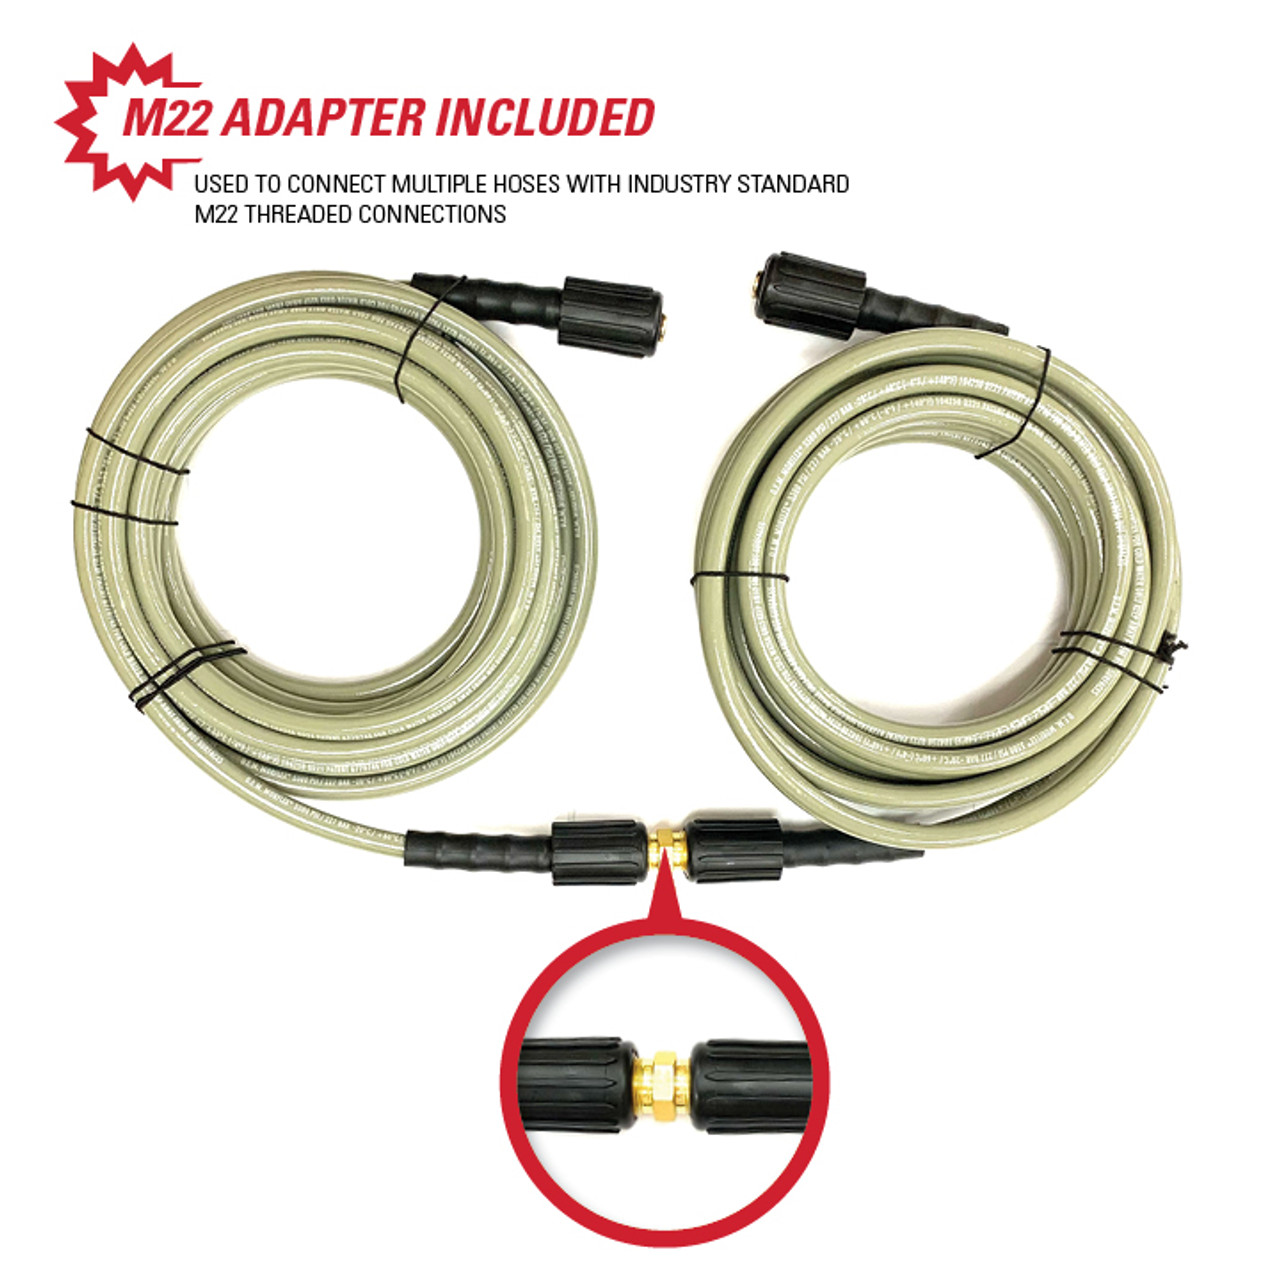 5/16 in. x 25 ft. x 3700 PSI Cold Water Replacement/Extension Hose 40225